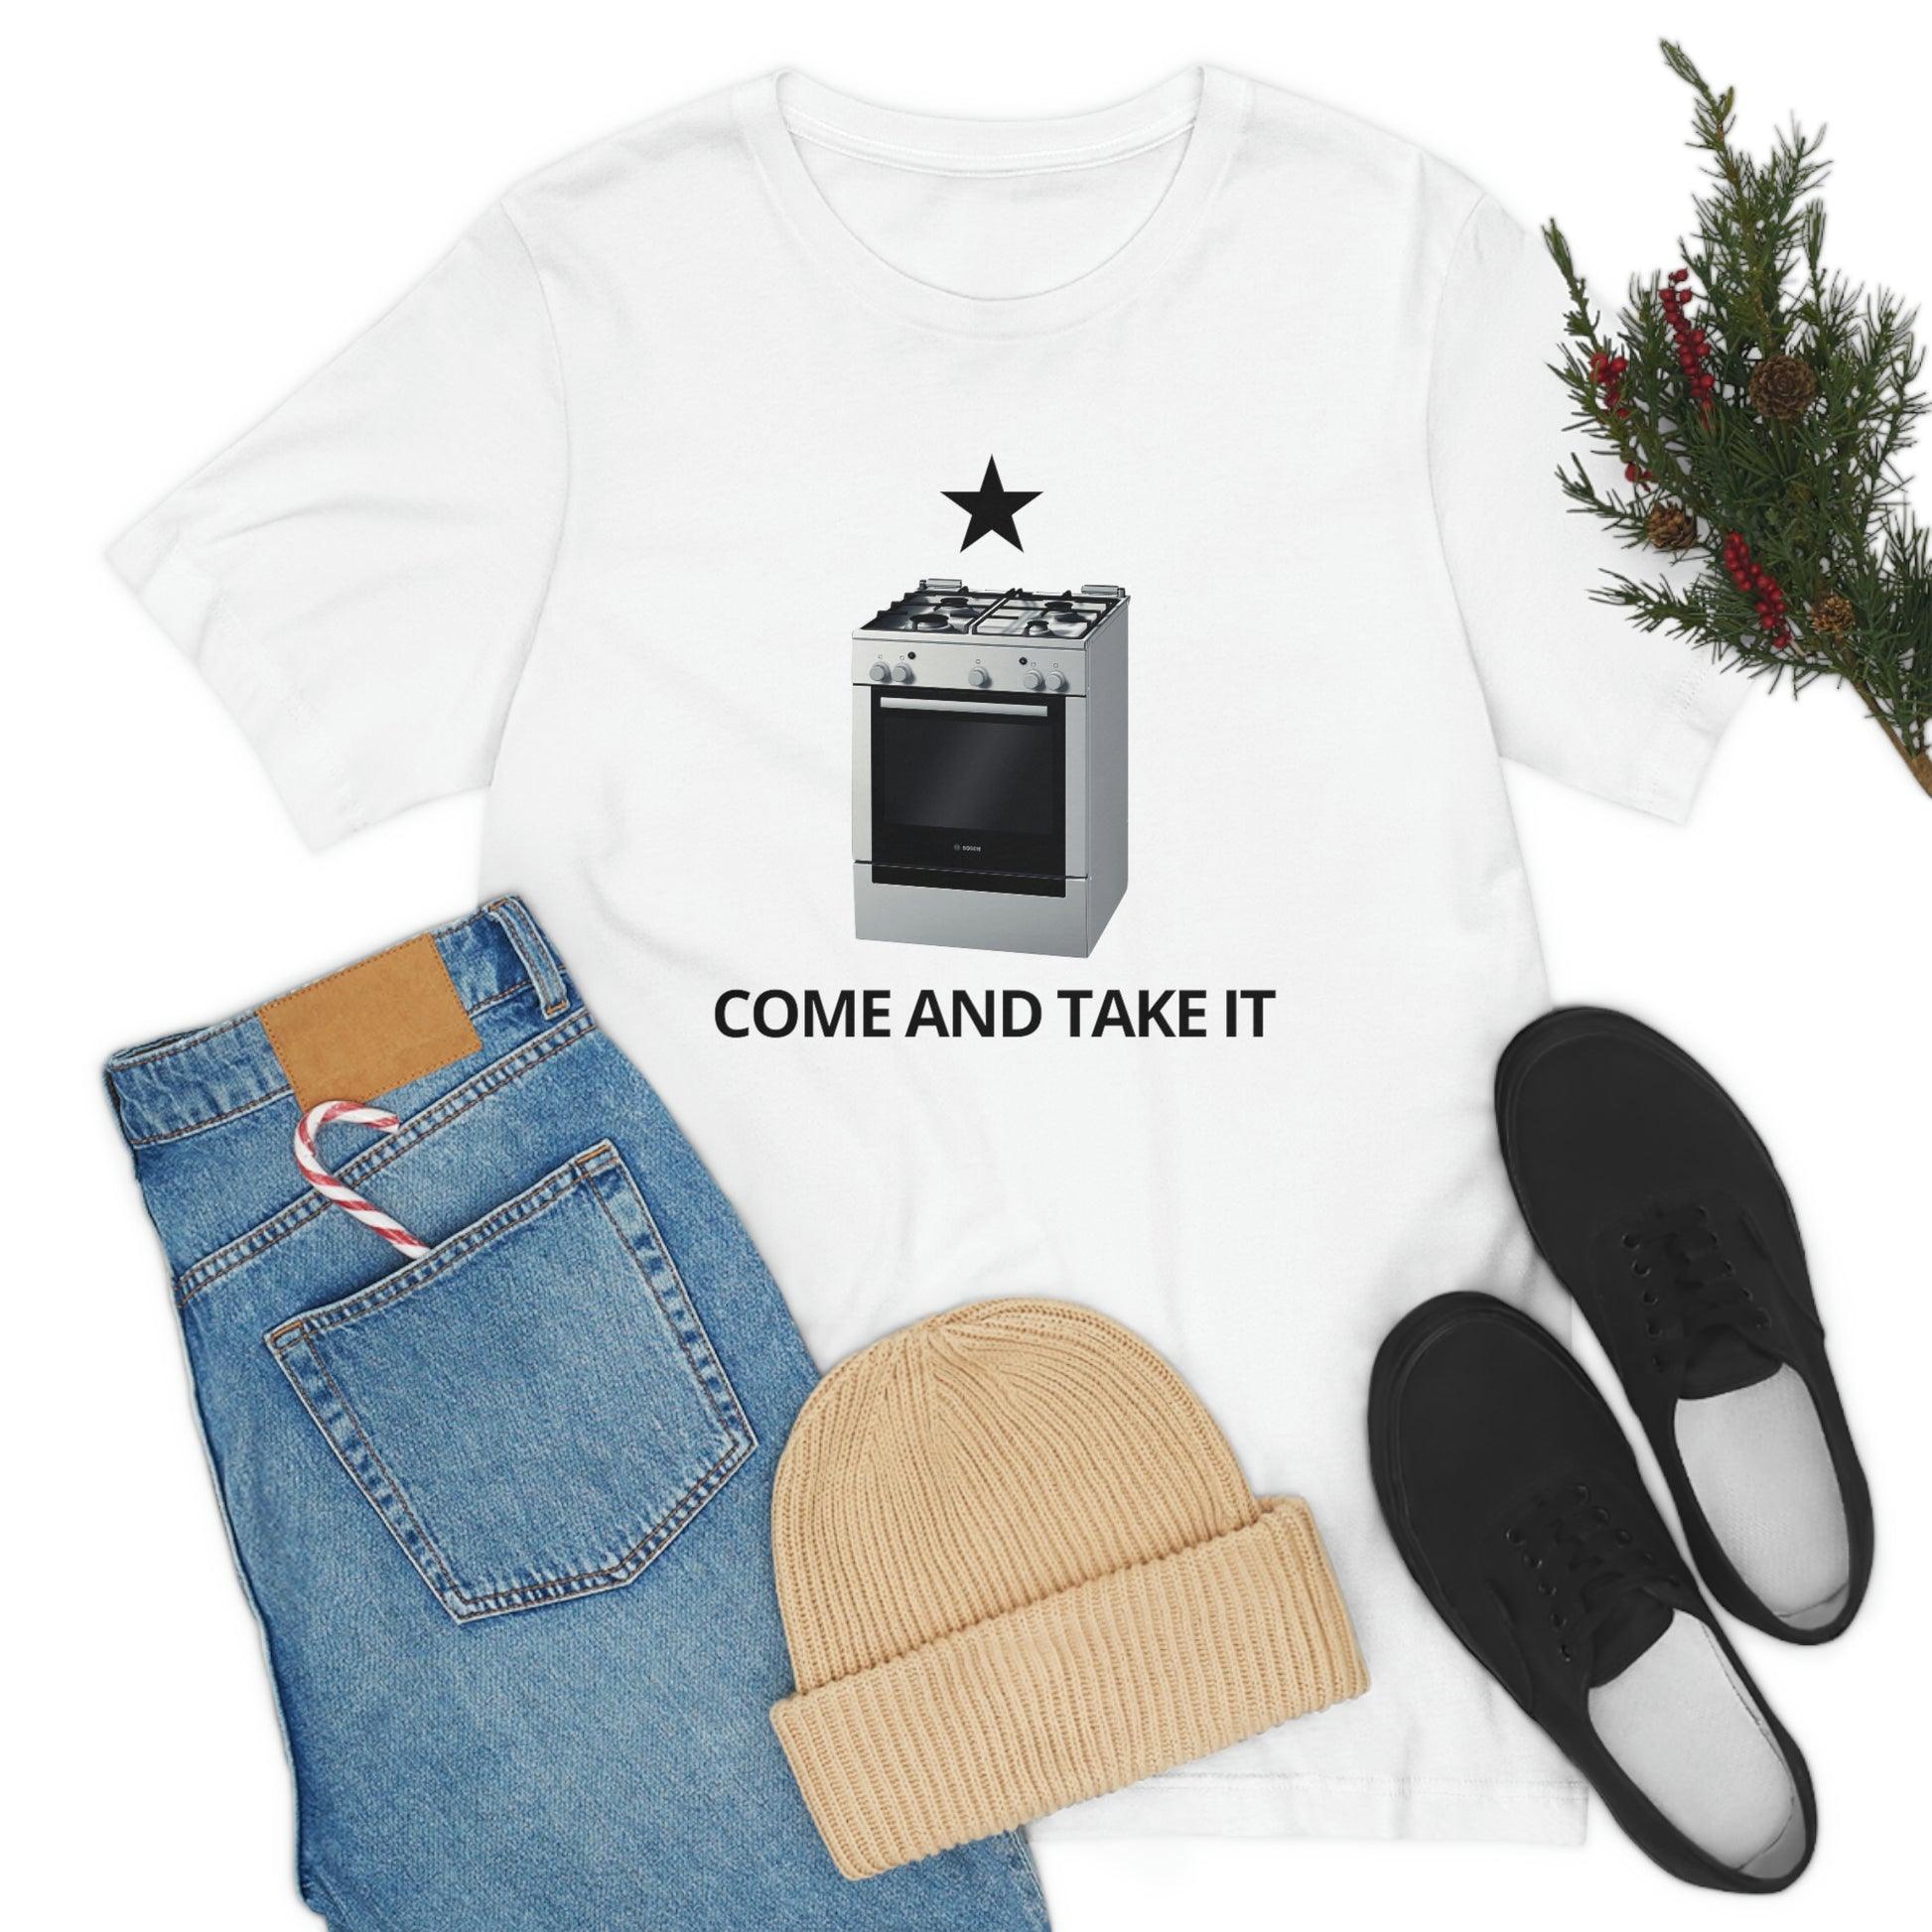 Gas Stove - Come And Take It | Mens/Unisex Short Sleeve T-Shirt - Rise of The New Media